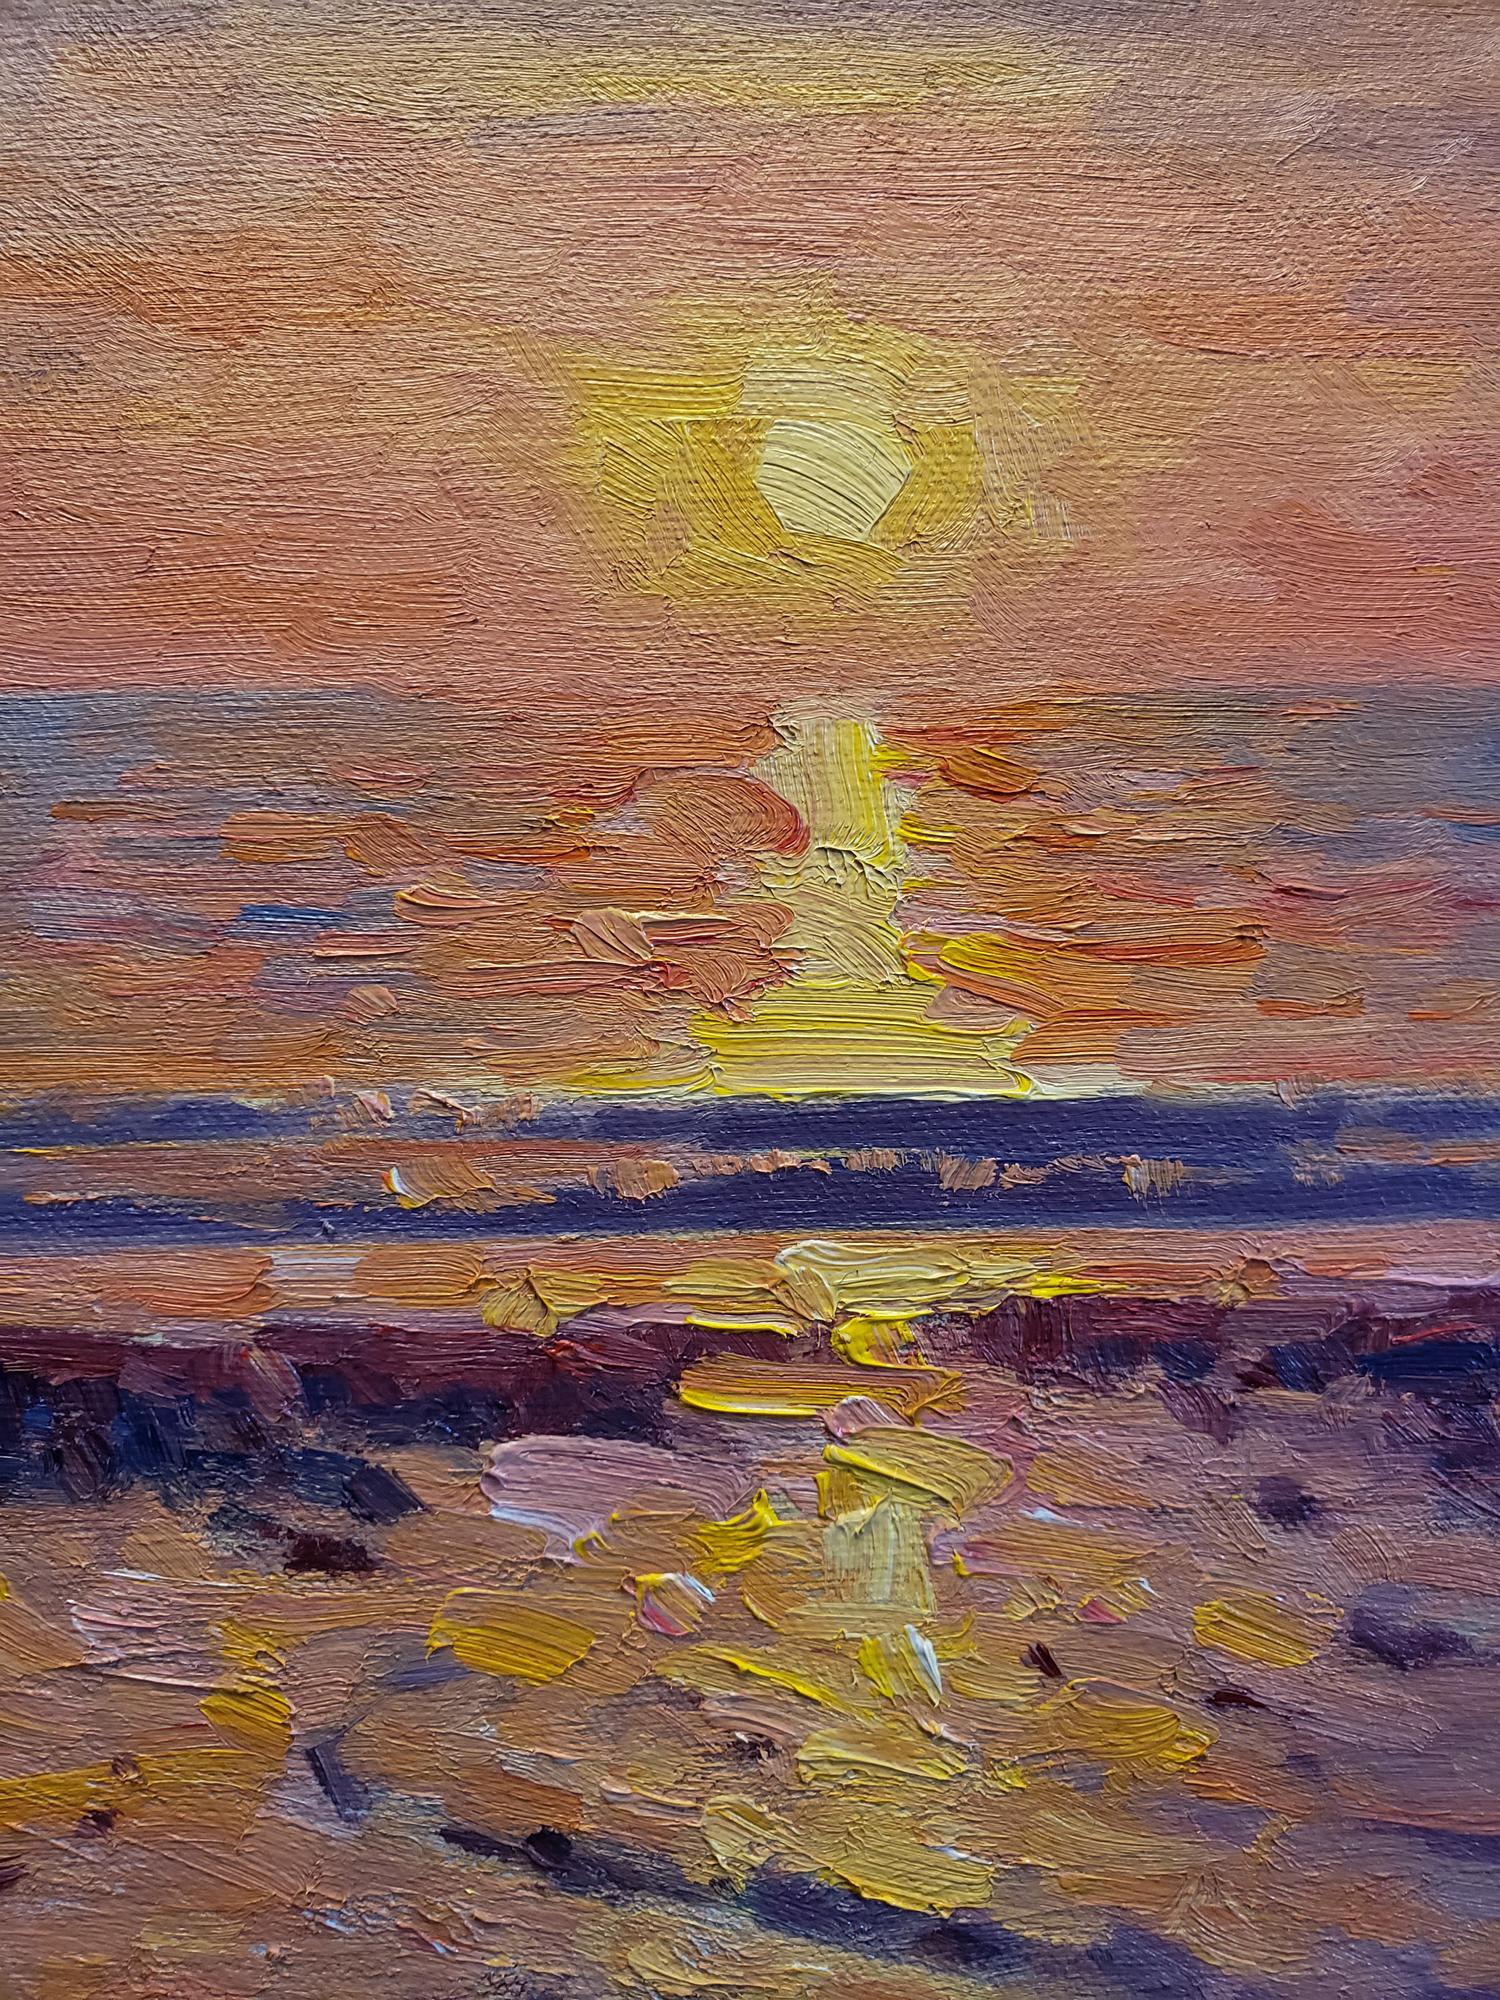 Sunset Reflection - Impressionist Painting by Michael Situ